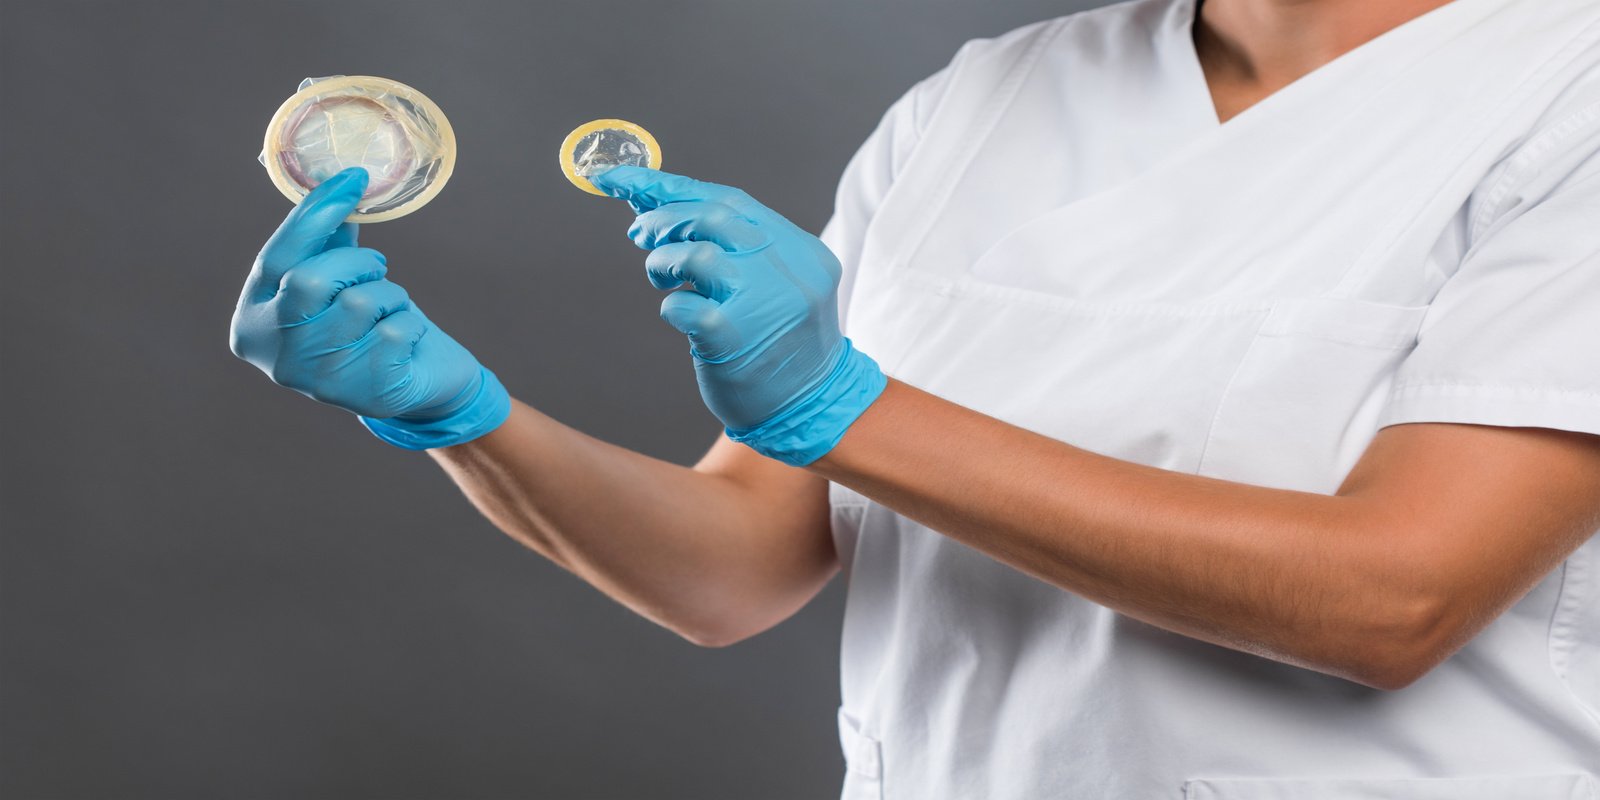 A doctor sex therapist wearing surgical gloves showing male and female condoms